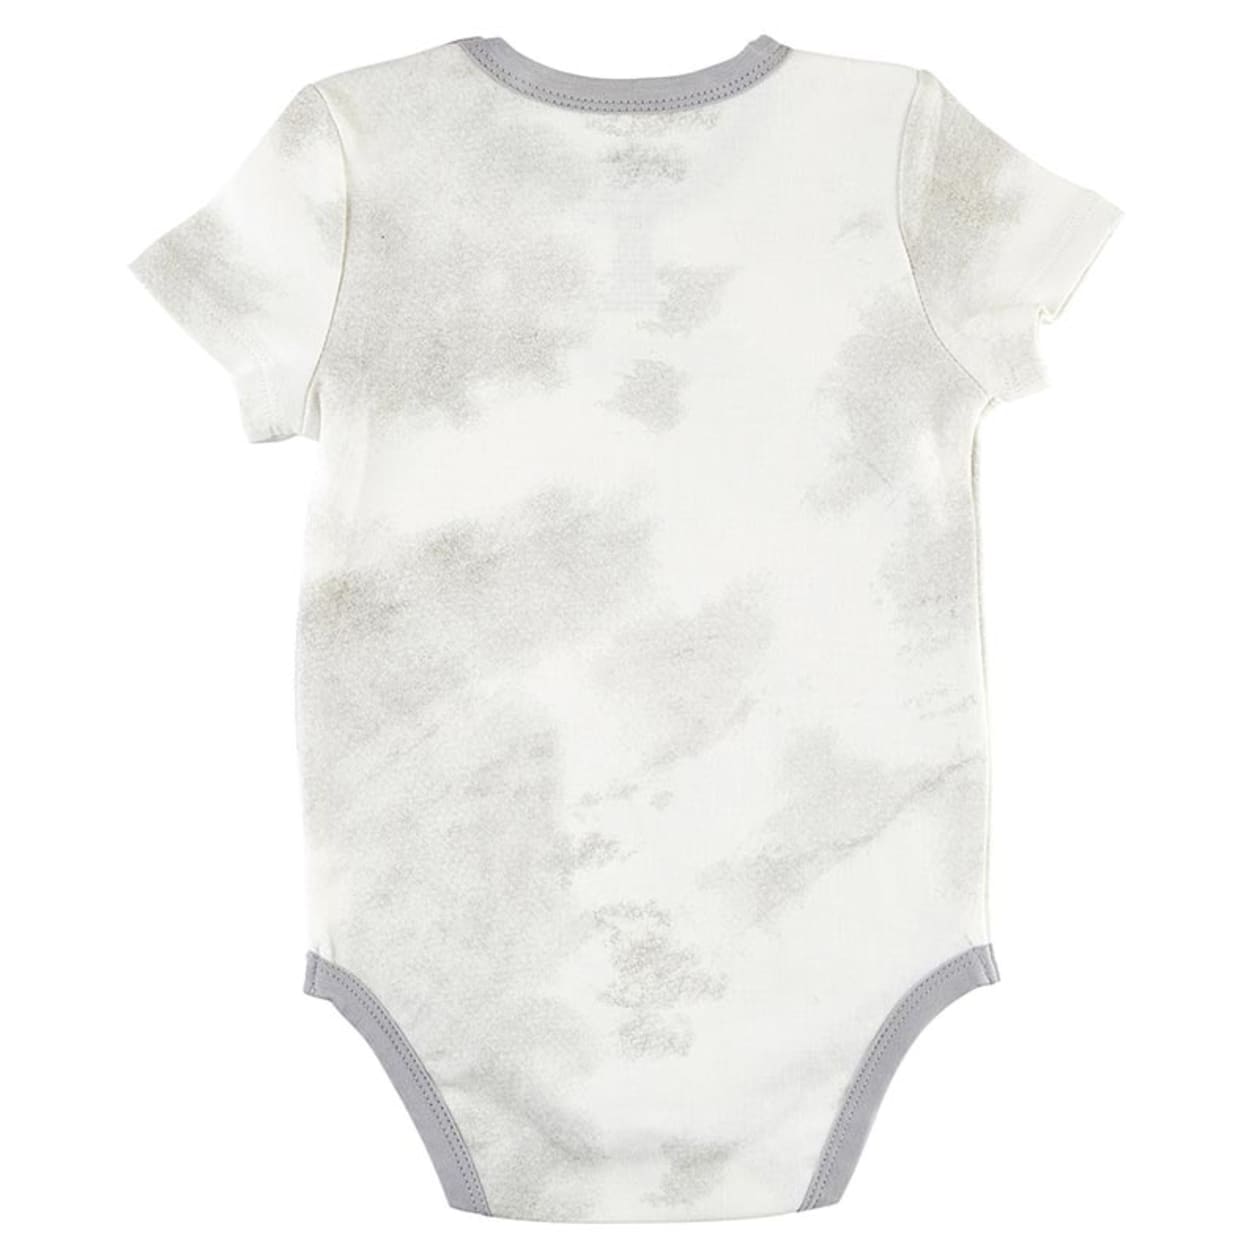 Groovy Baby Snapshirt in Tie Dye-Grey | Unisex Cotton Baby Body Suit | Size 6-12 Months